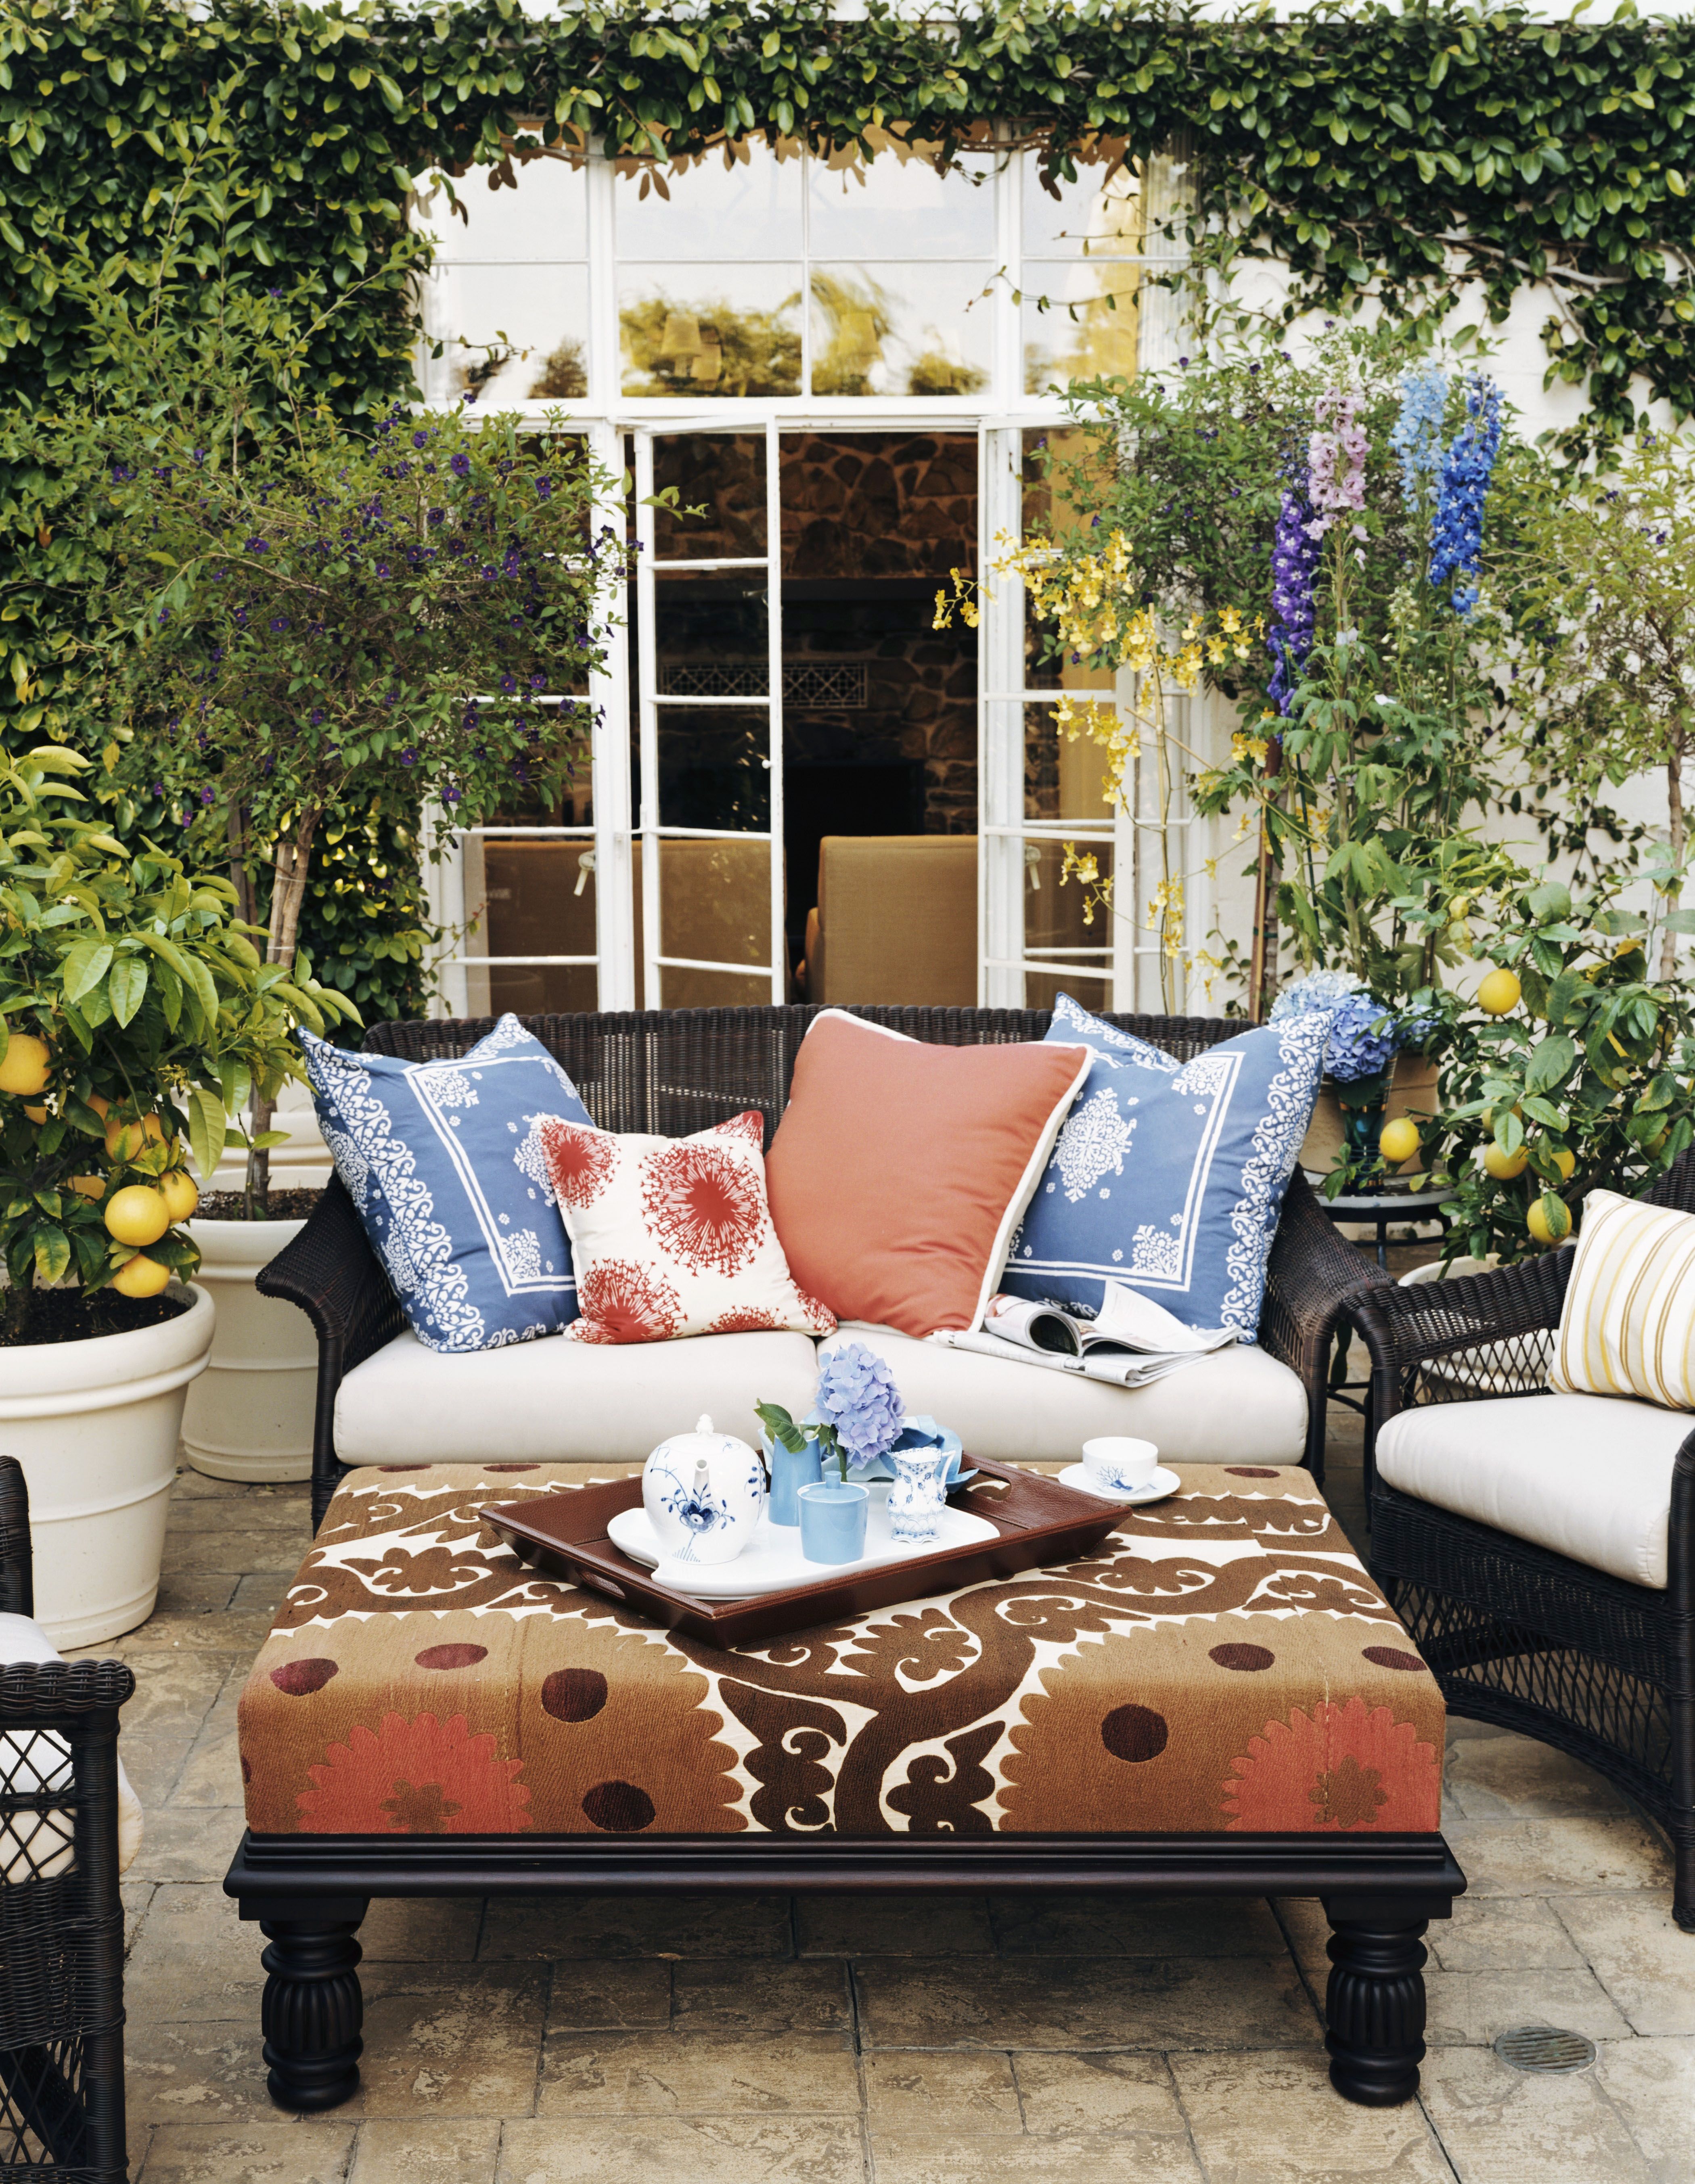 The Best Outdoor Area Rugs For Your Outdoor Living Areas  Front porch  decorating, Porch decorating, House with porch